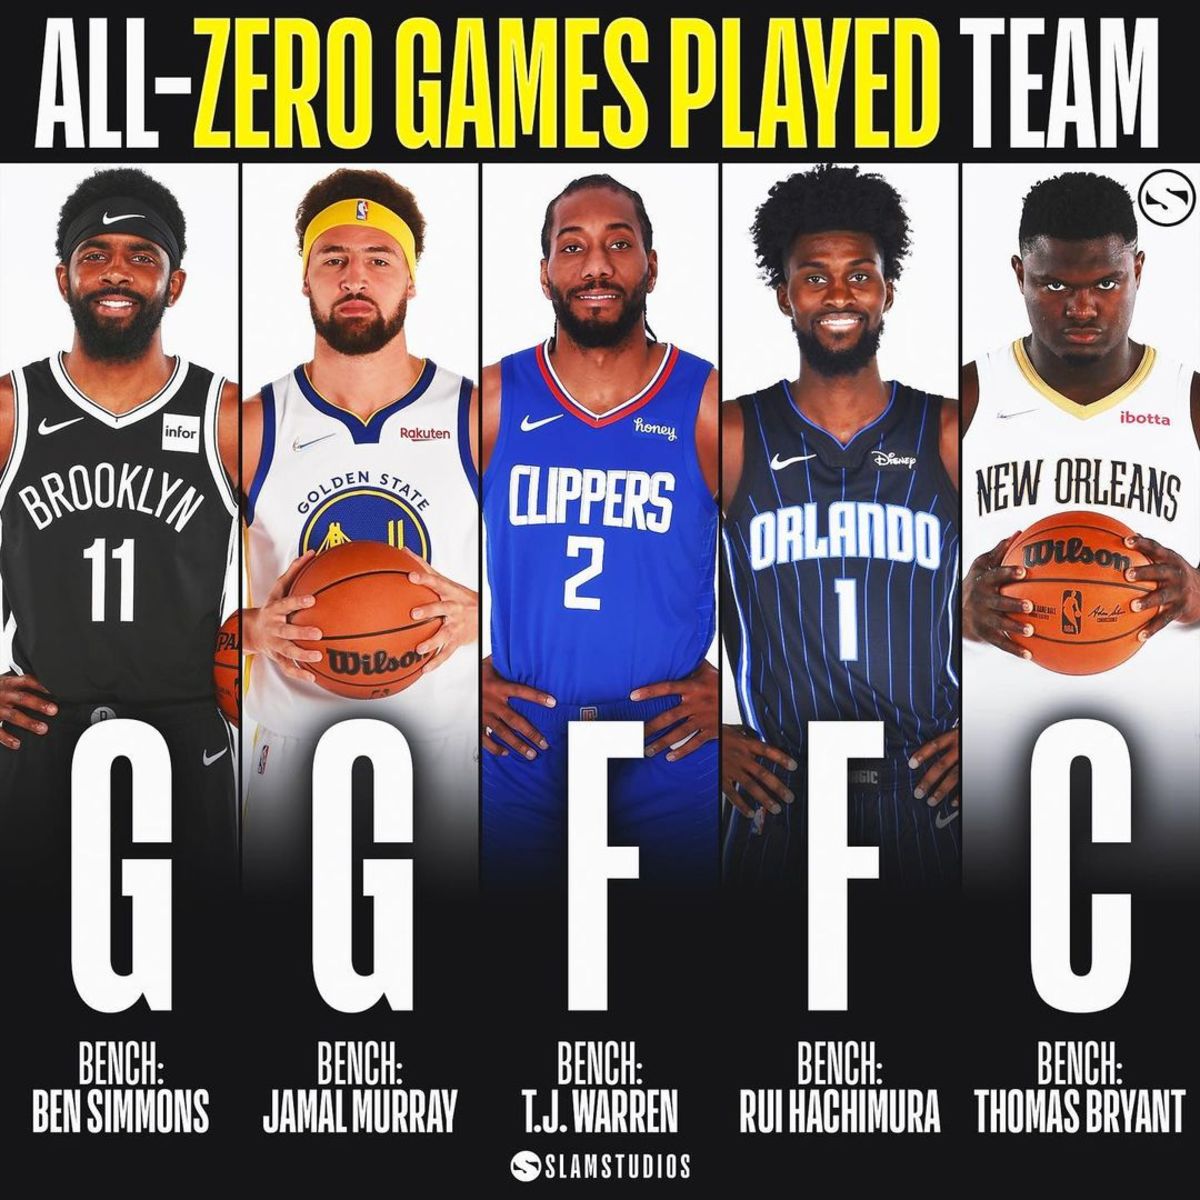 All-Zero Games Played Team: "This Team Would Be Dynasty"